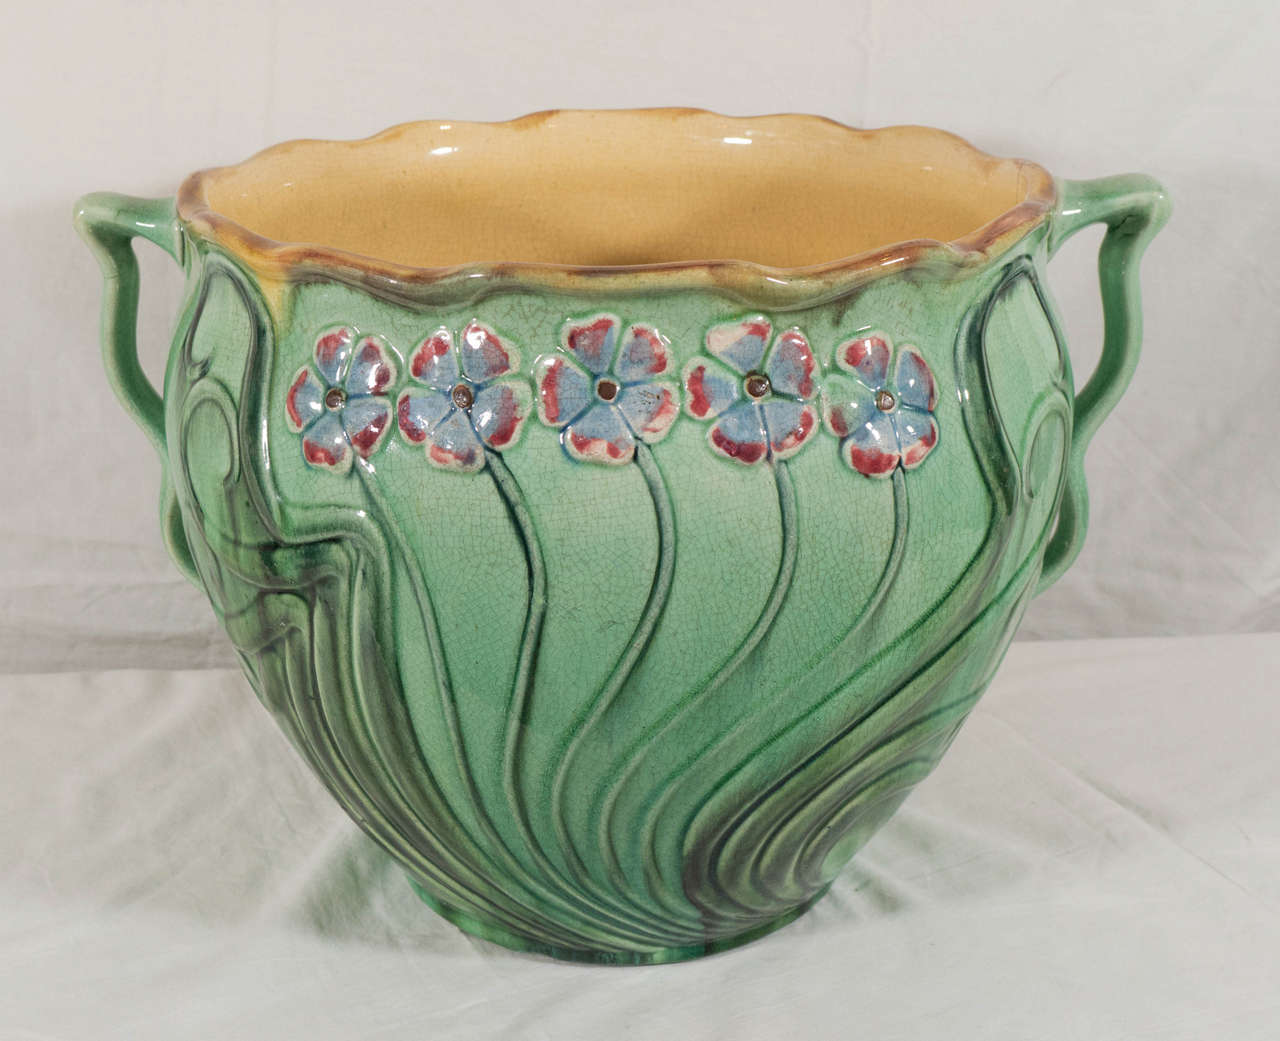 A large majolica jardiniere with an Art Nouveau floral design inspired by the flowing lines of flowers and plants. Both sides of the planter are decorated with a row of red and blue flowers on curving stalks. This planter will be perfect for orchids.